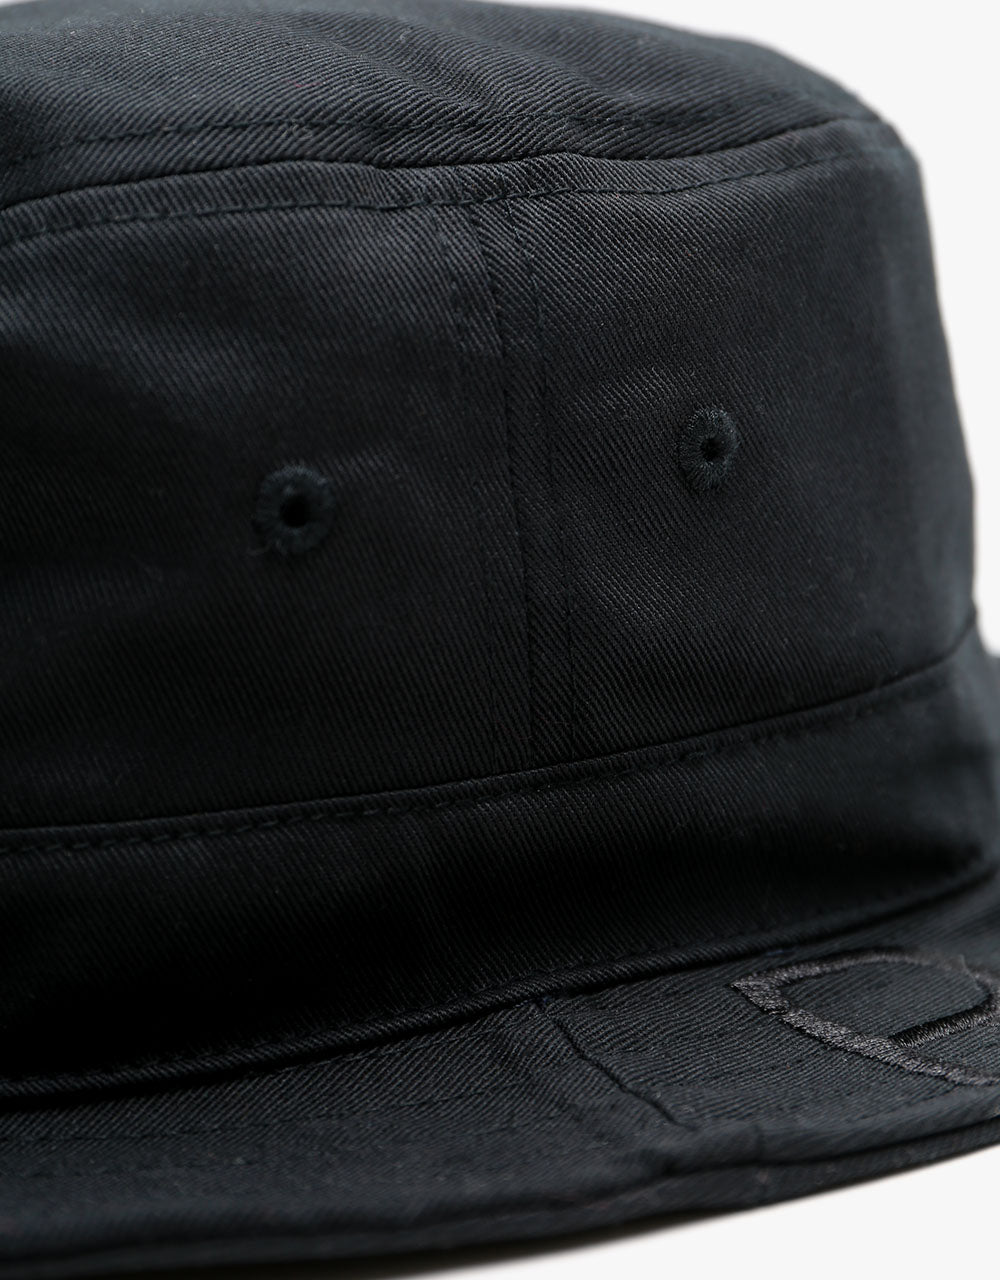 Route One Brimmed Bucket Hat - Black